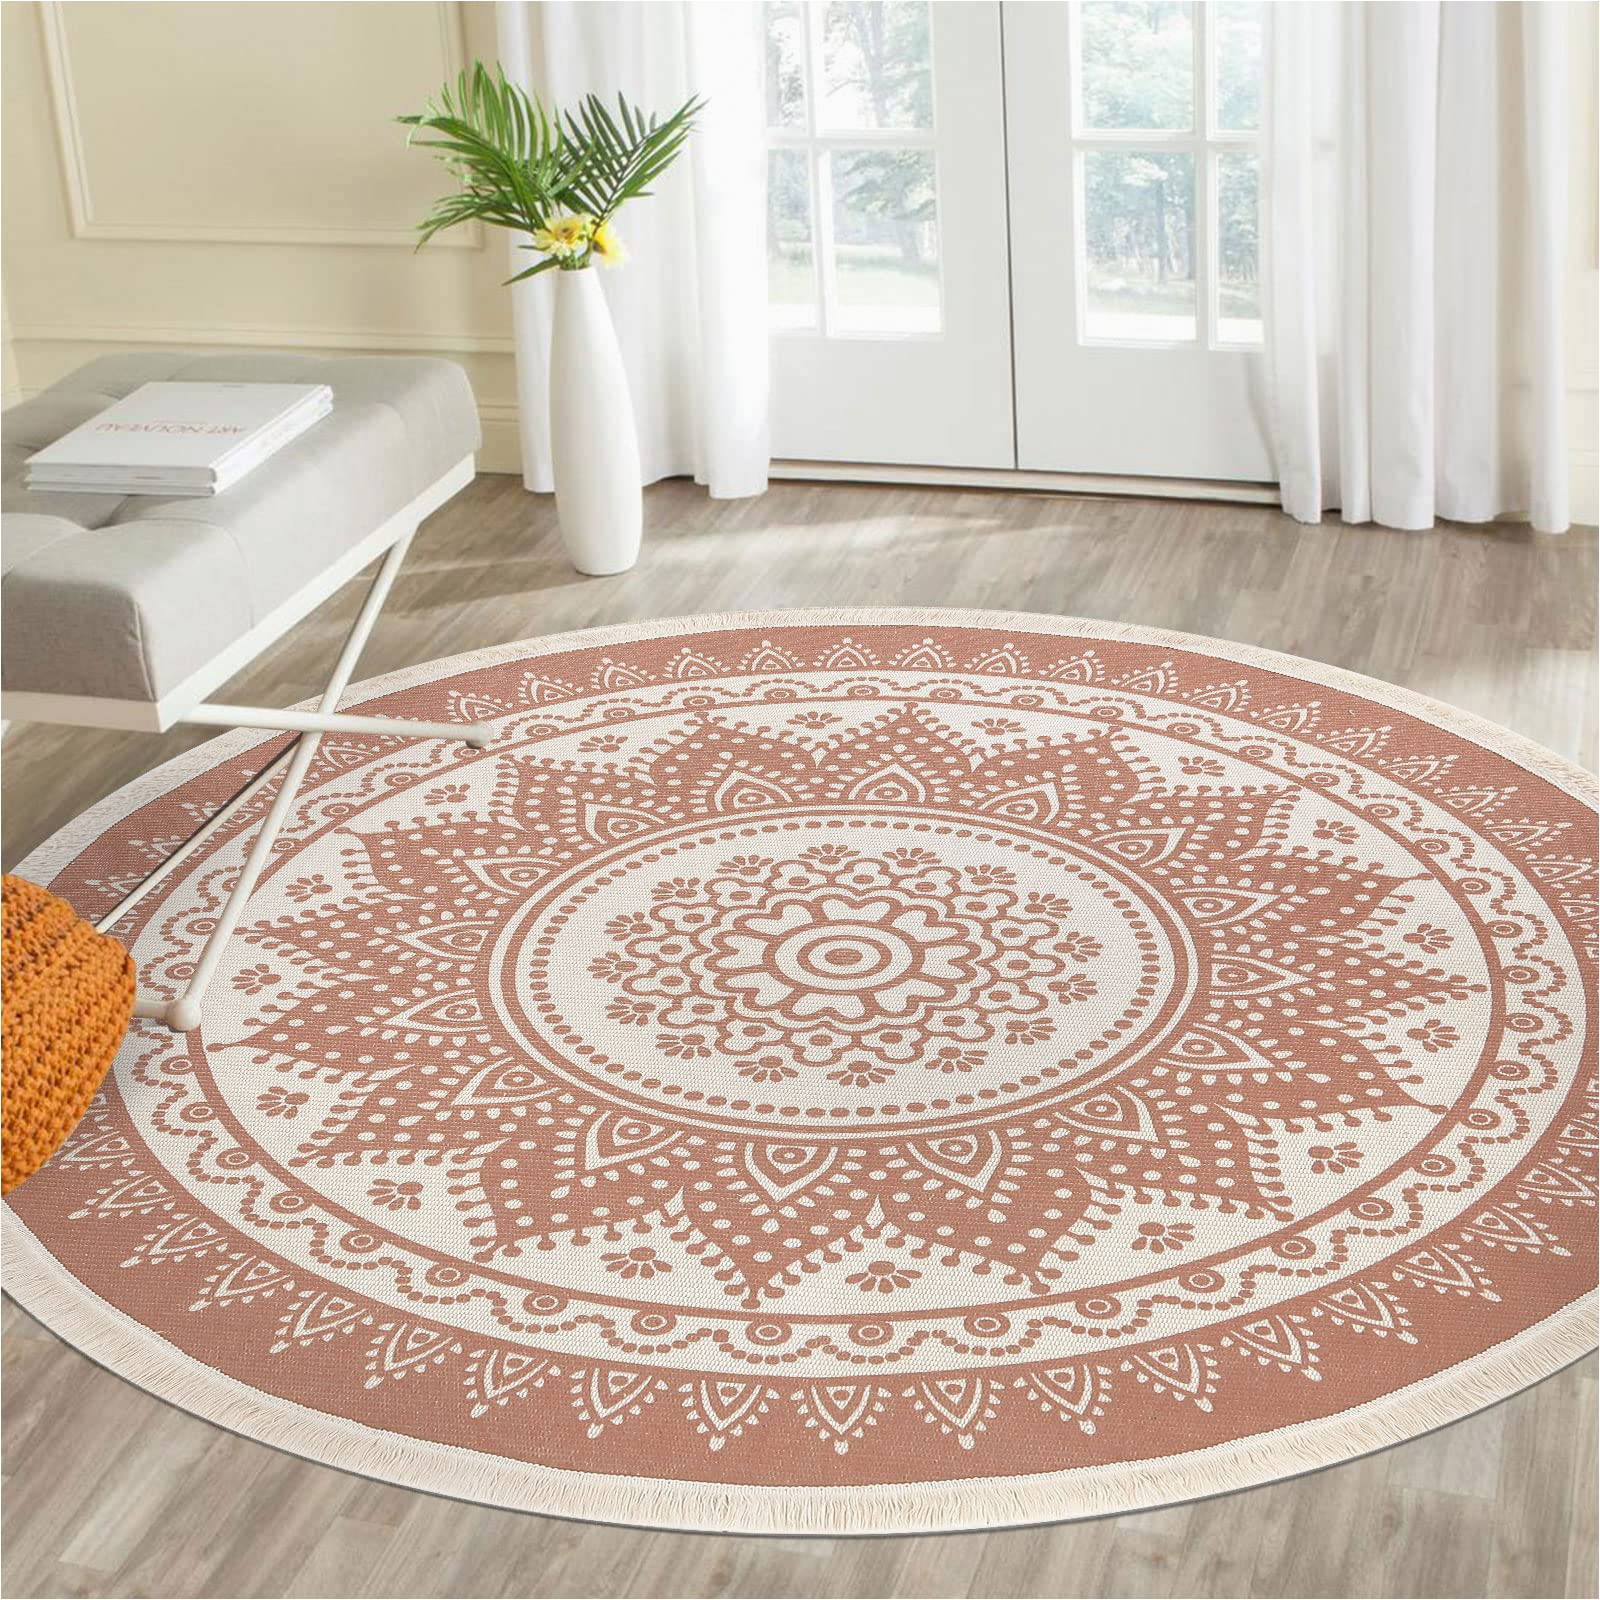 4 Foot Round area Rugs Shacos 4ft Round Rugs Boho Mandala Woven Cotton area Rug Chic Decorative Circle Rug with Tassels Machine Washable for Living Room Bedroom Kitchen Kids …